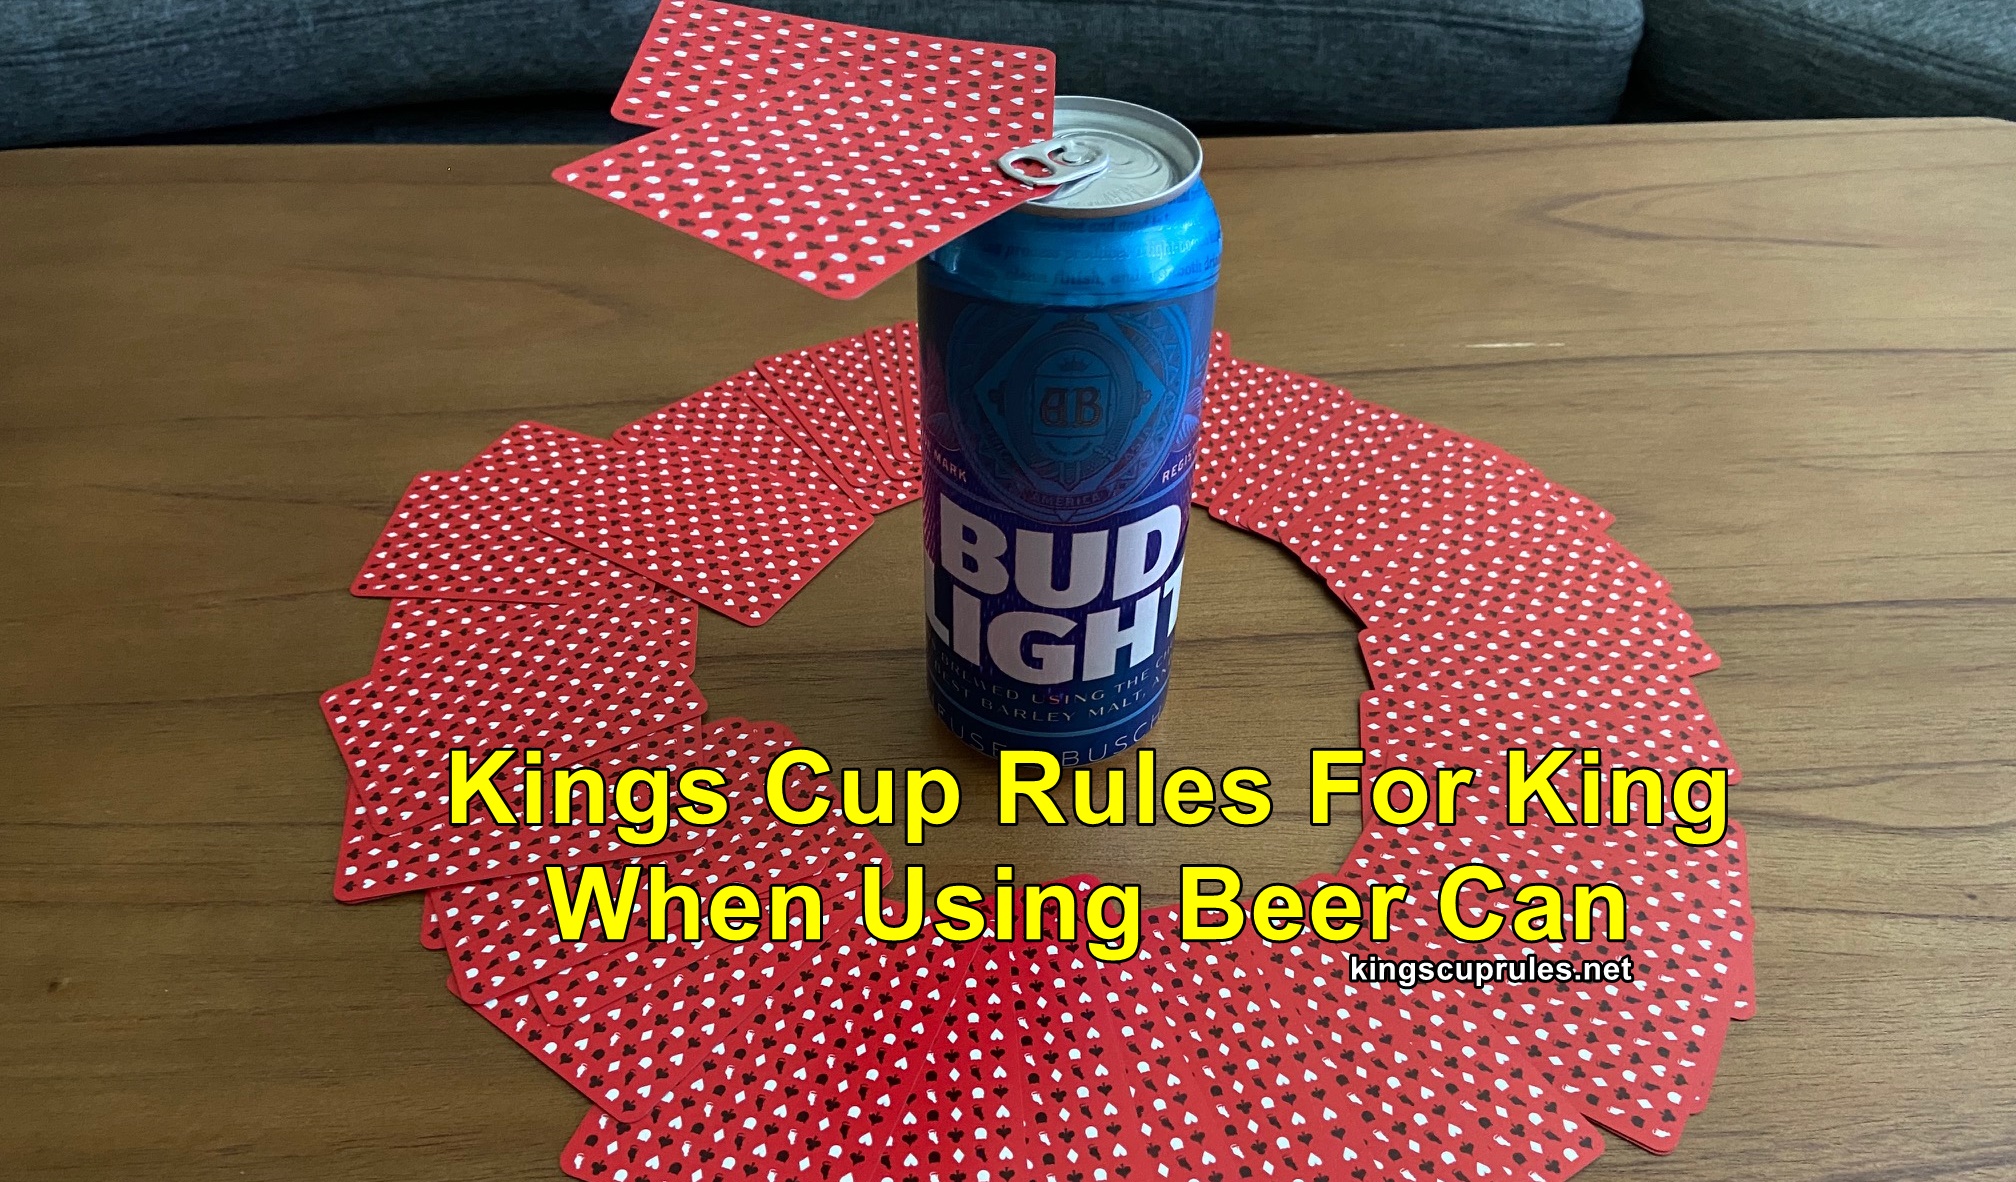 Kings Cup Rules For King When Using Beer Can